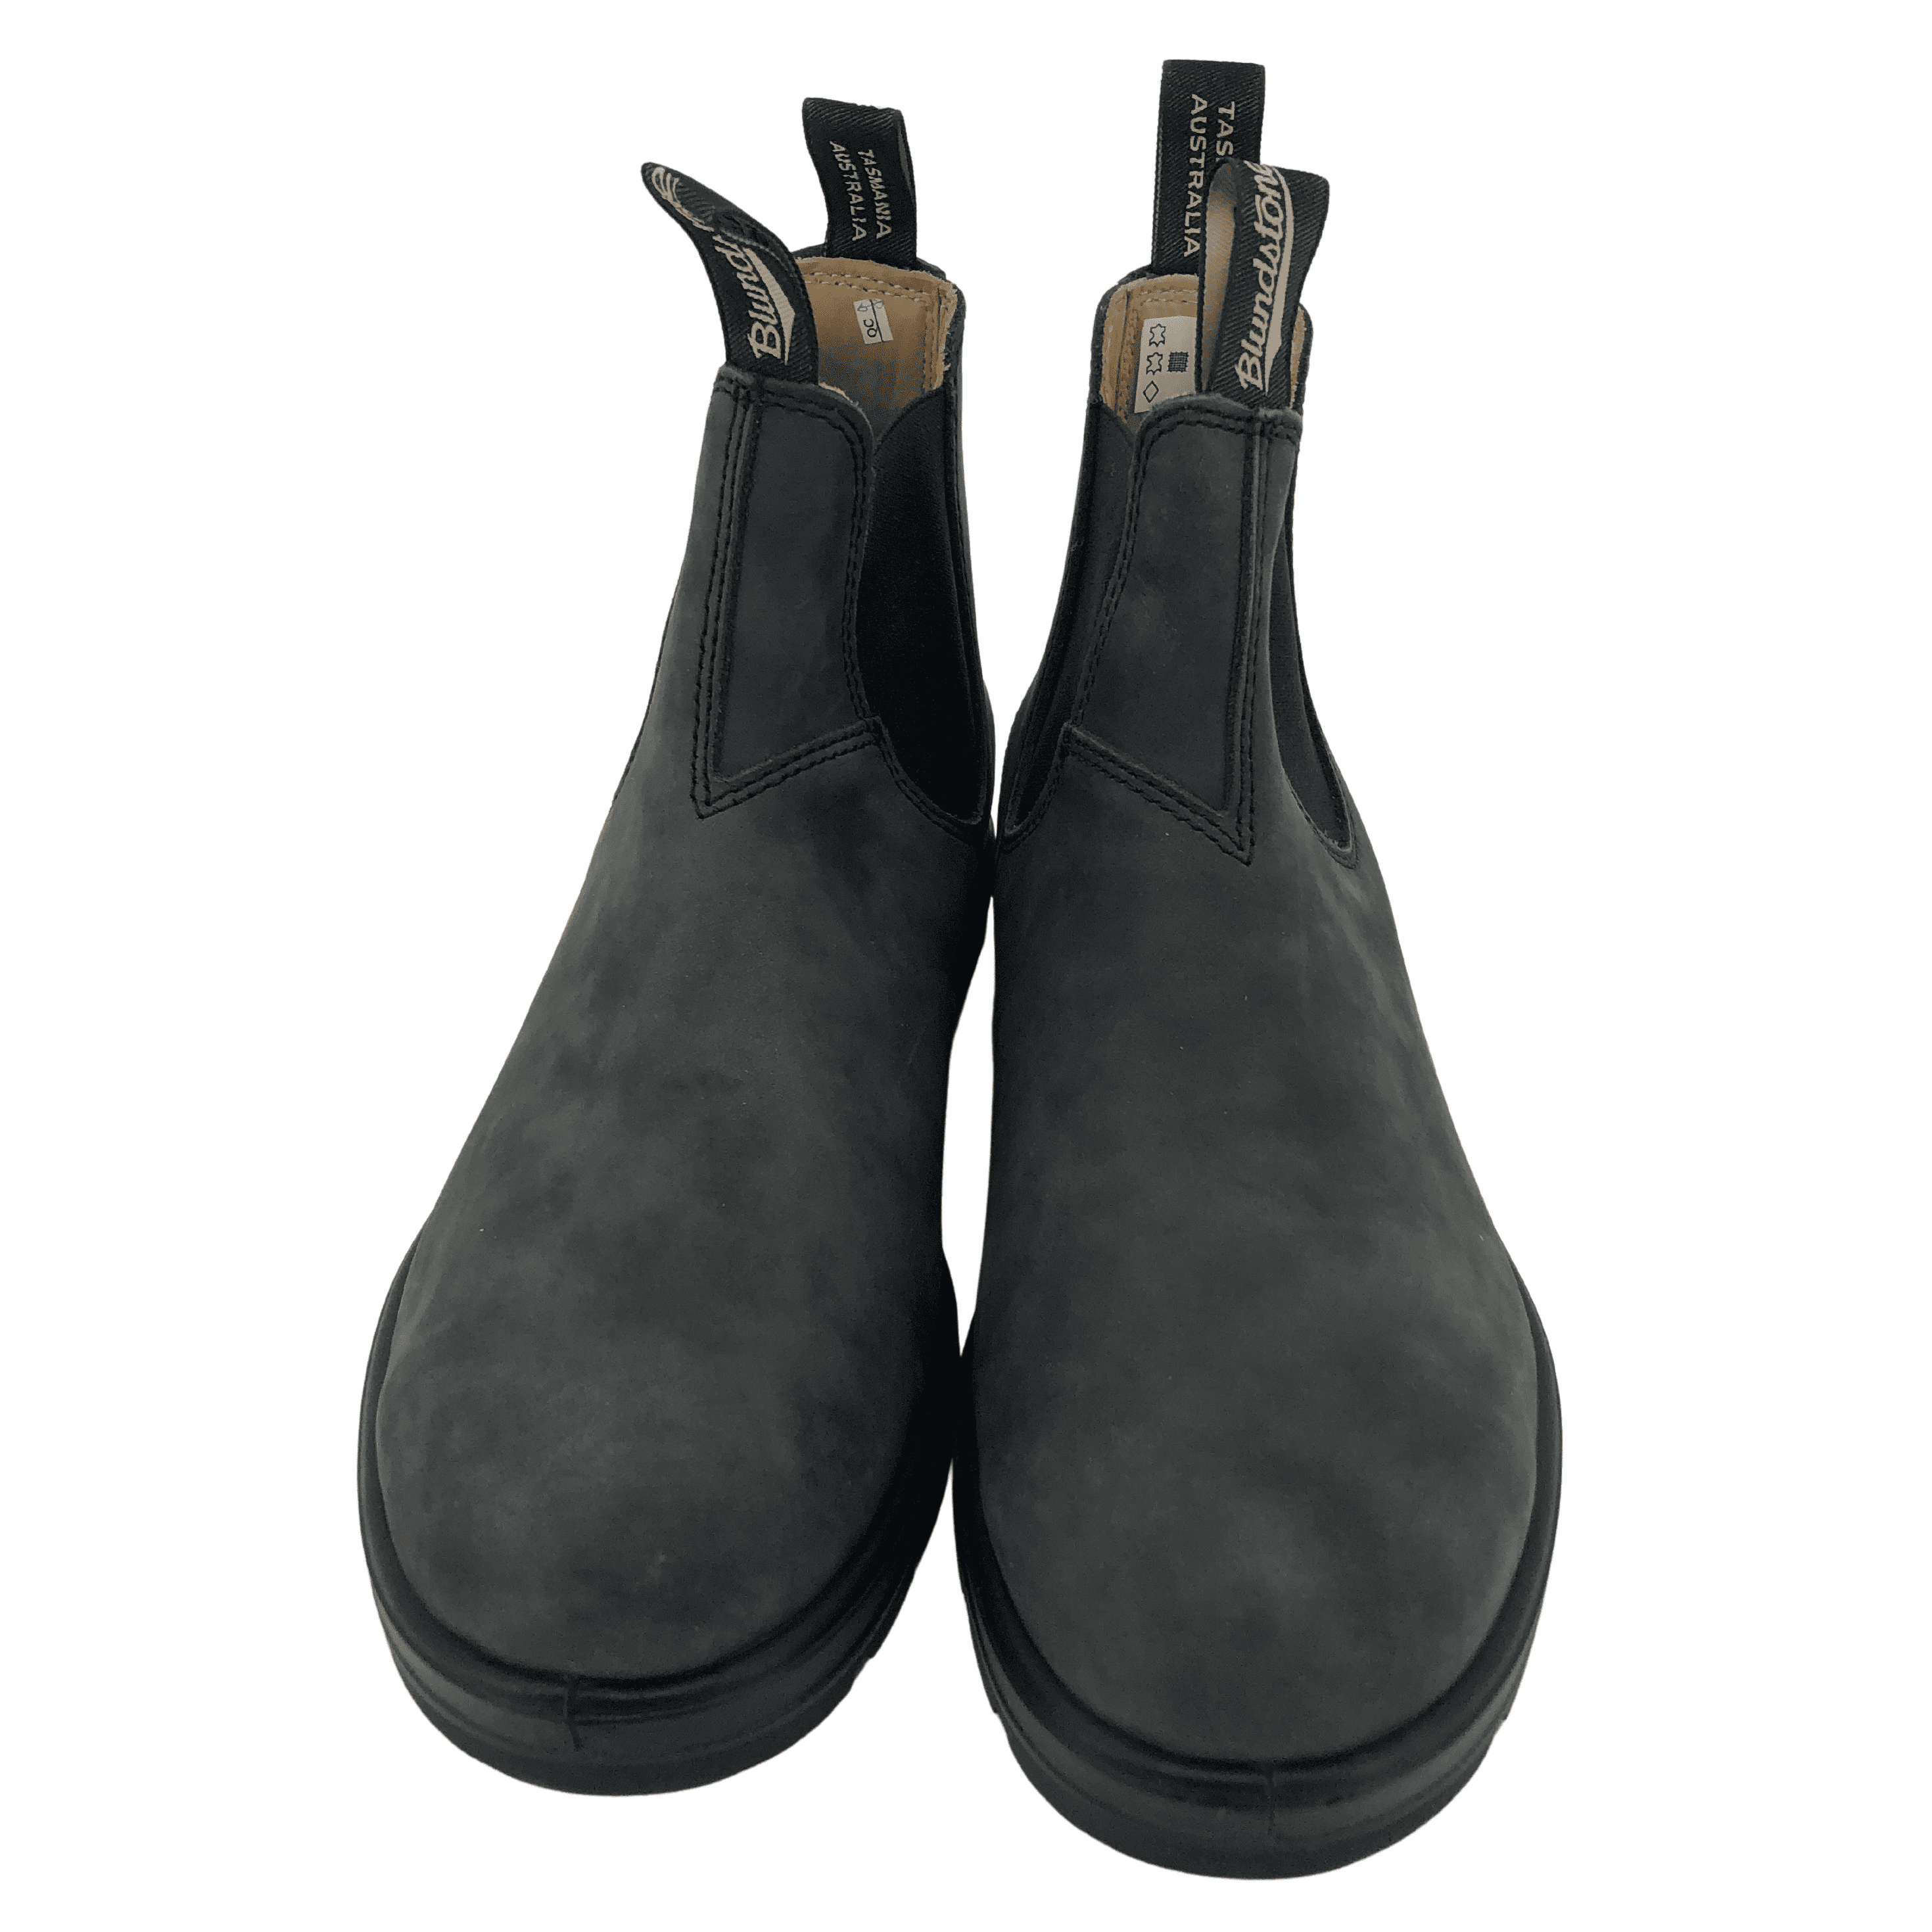 Blundstone Unisex Pull-On Boots / 587 Series / Black / Men's Size 10